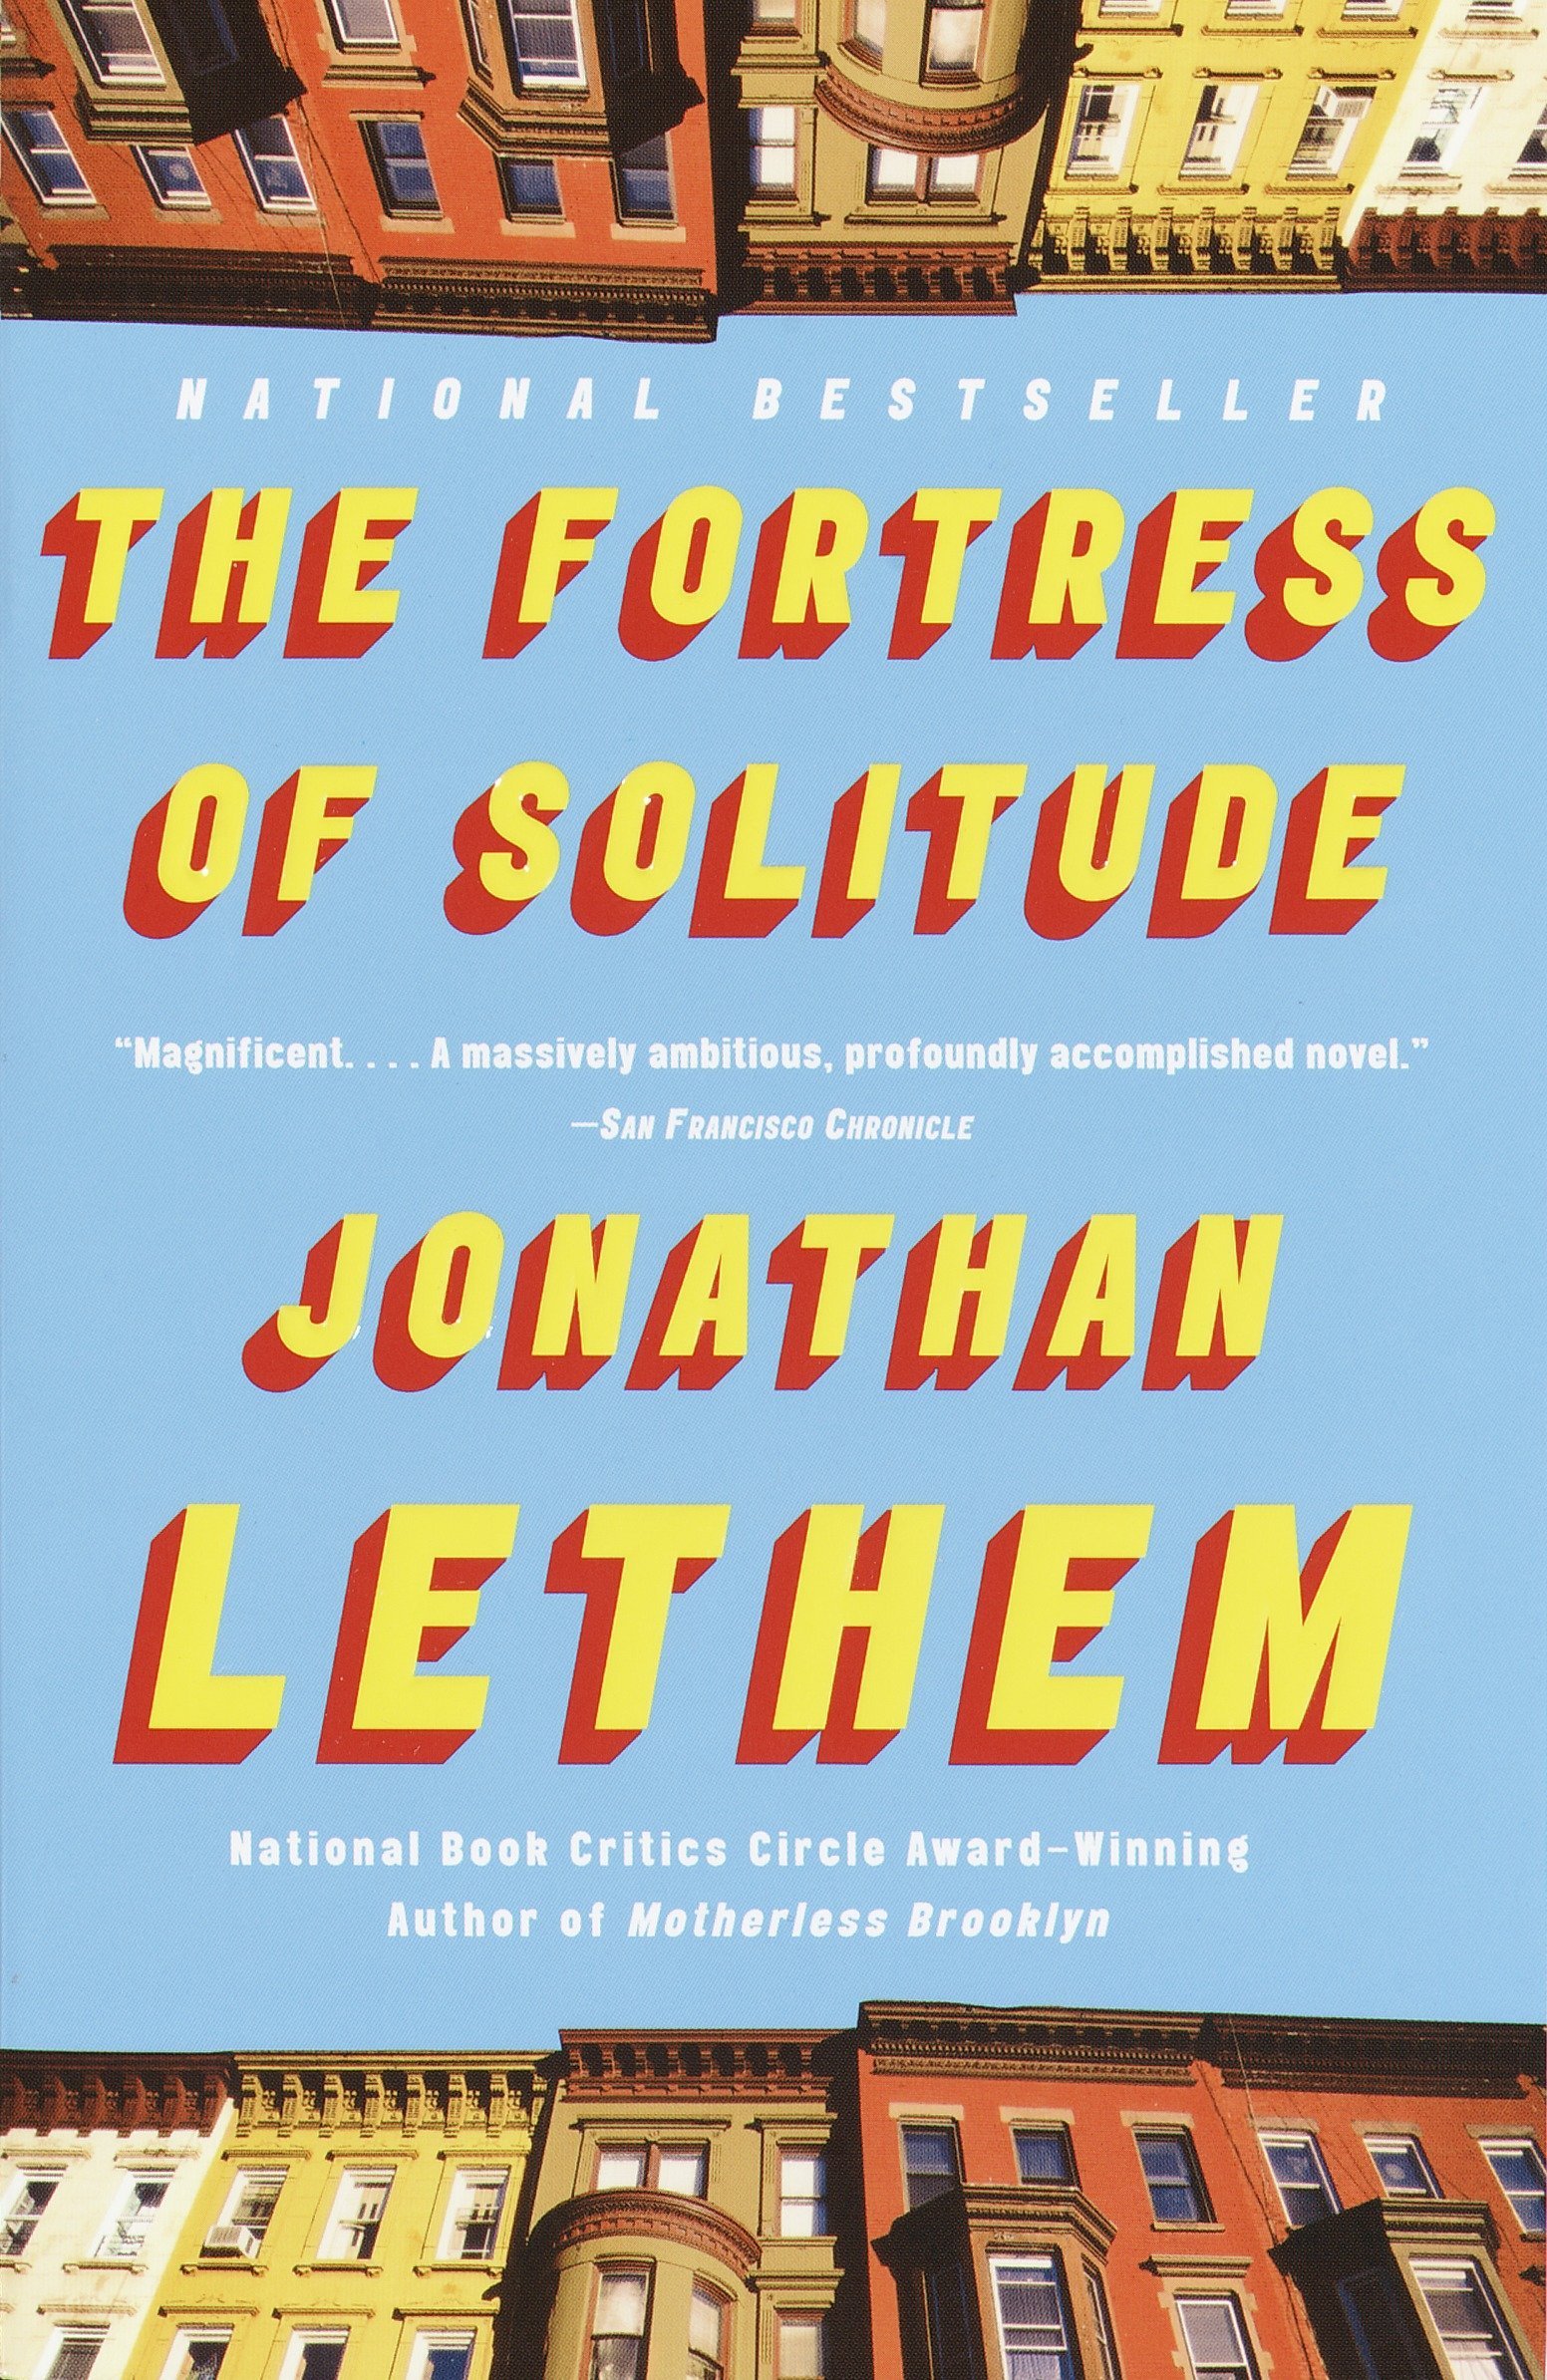 The cover of the novel “The Fortress of Solitude” by Jonathan Lethem.